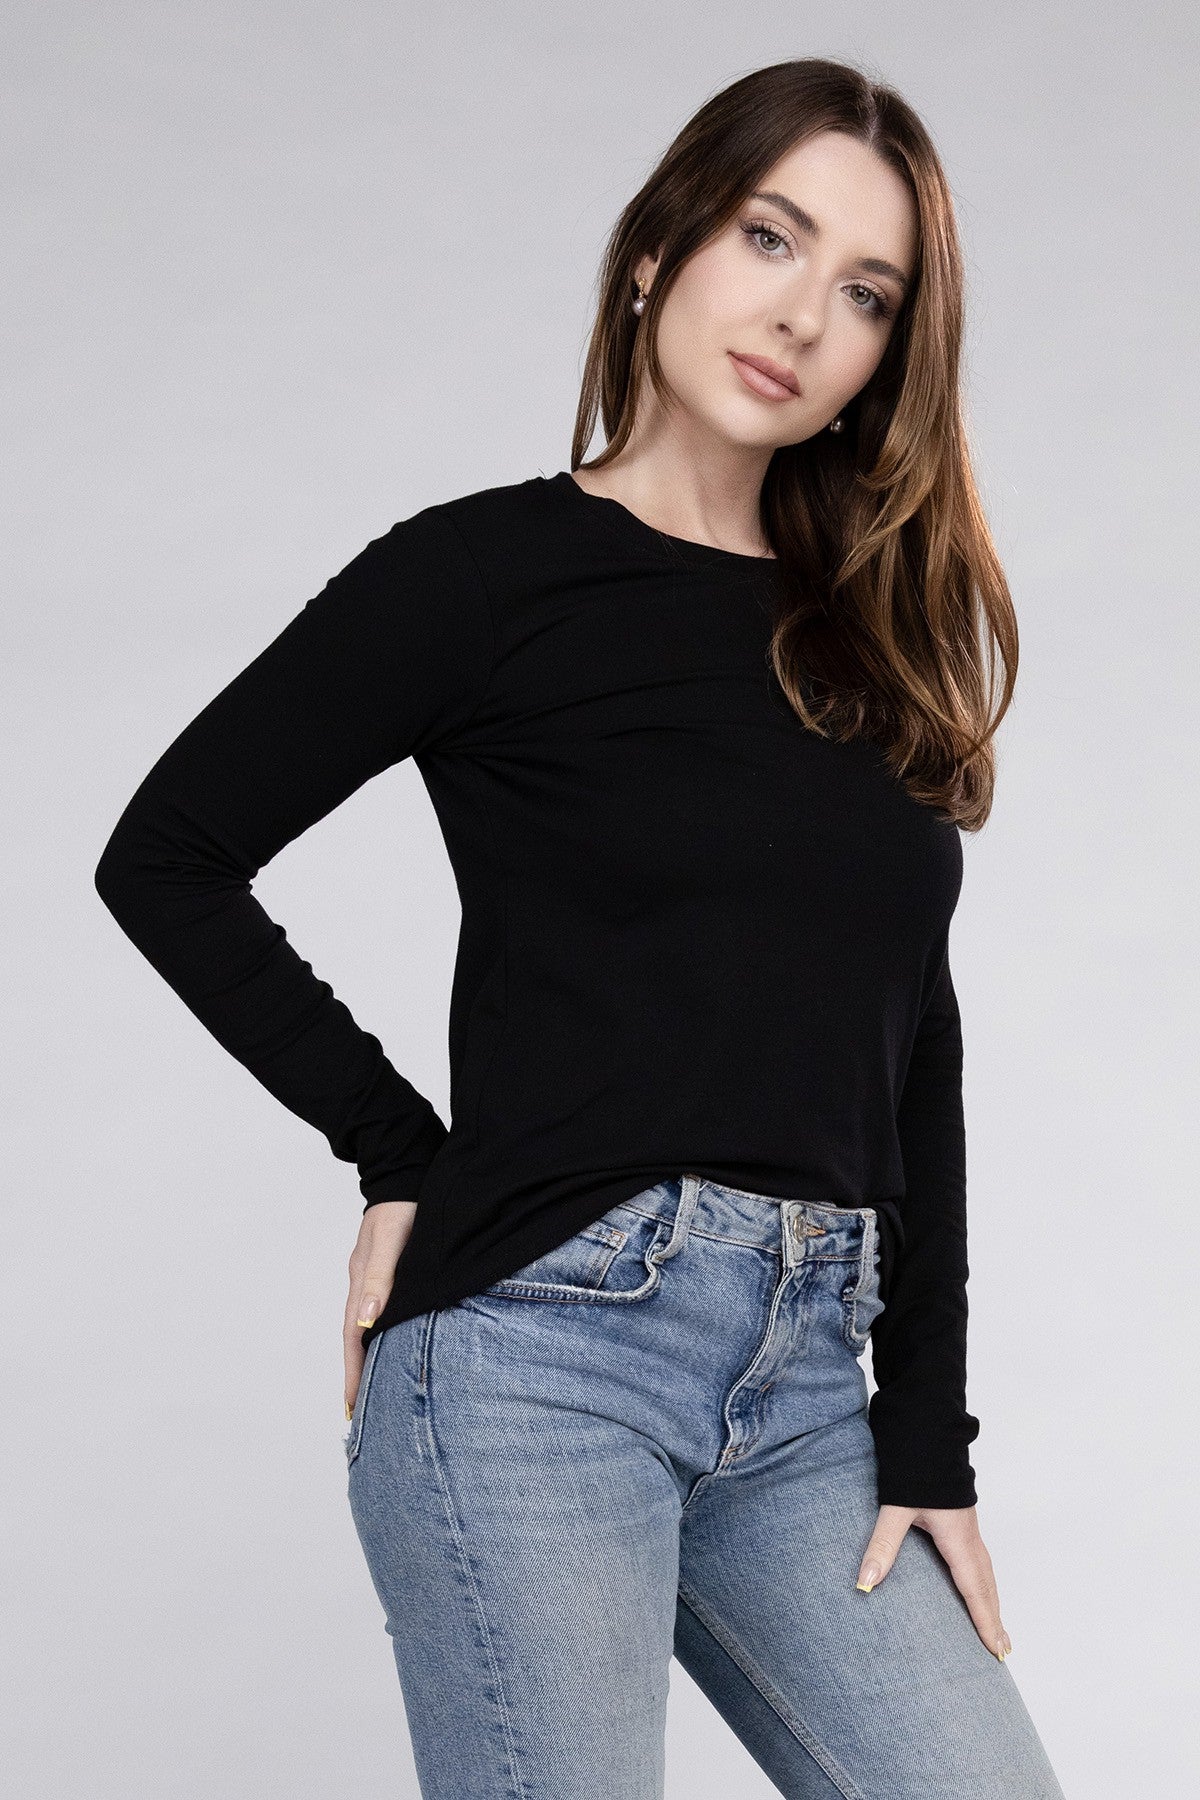 Let's Layer Cotton Crew Neck Long Sleeve T-Shirt